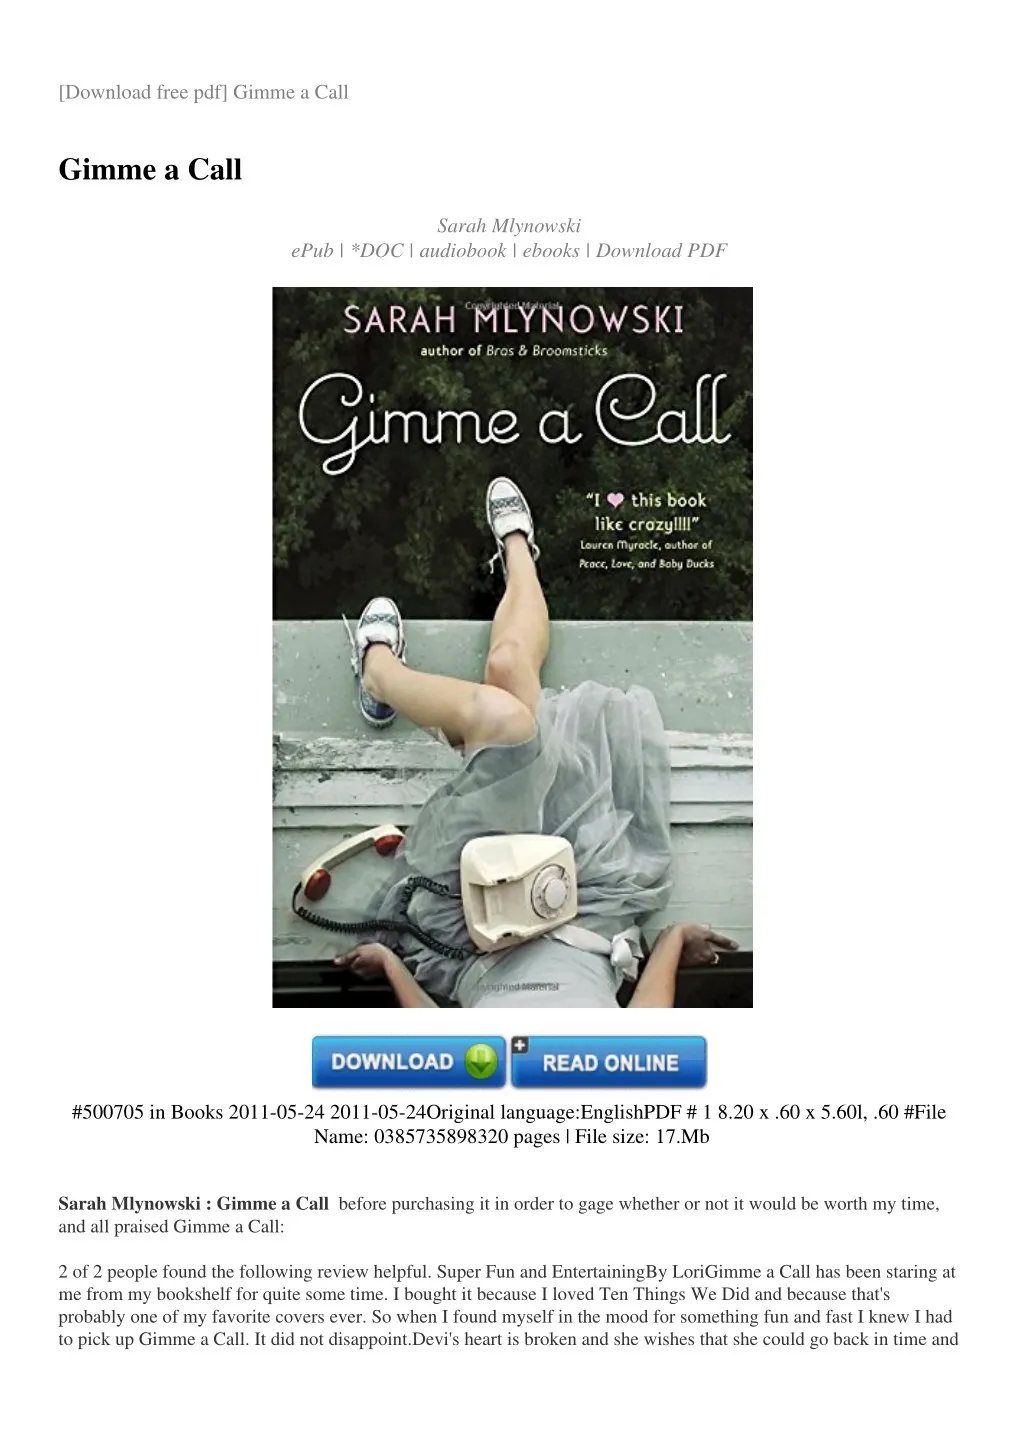 download free pdf gimme a call